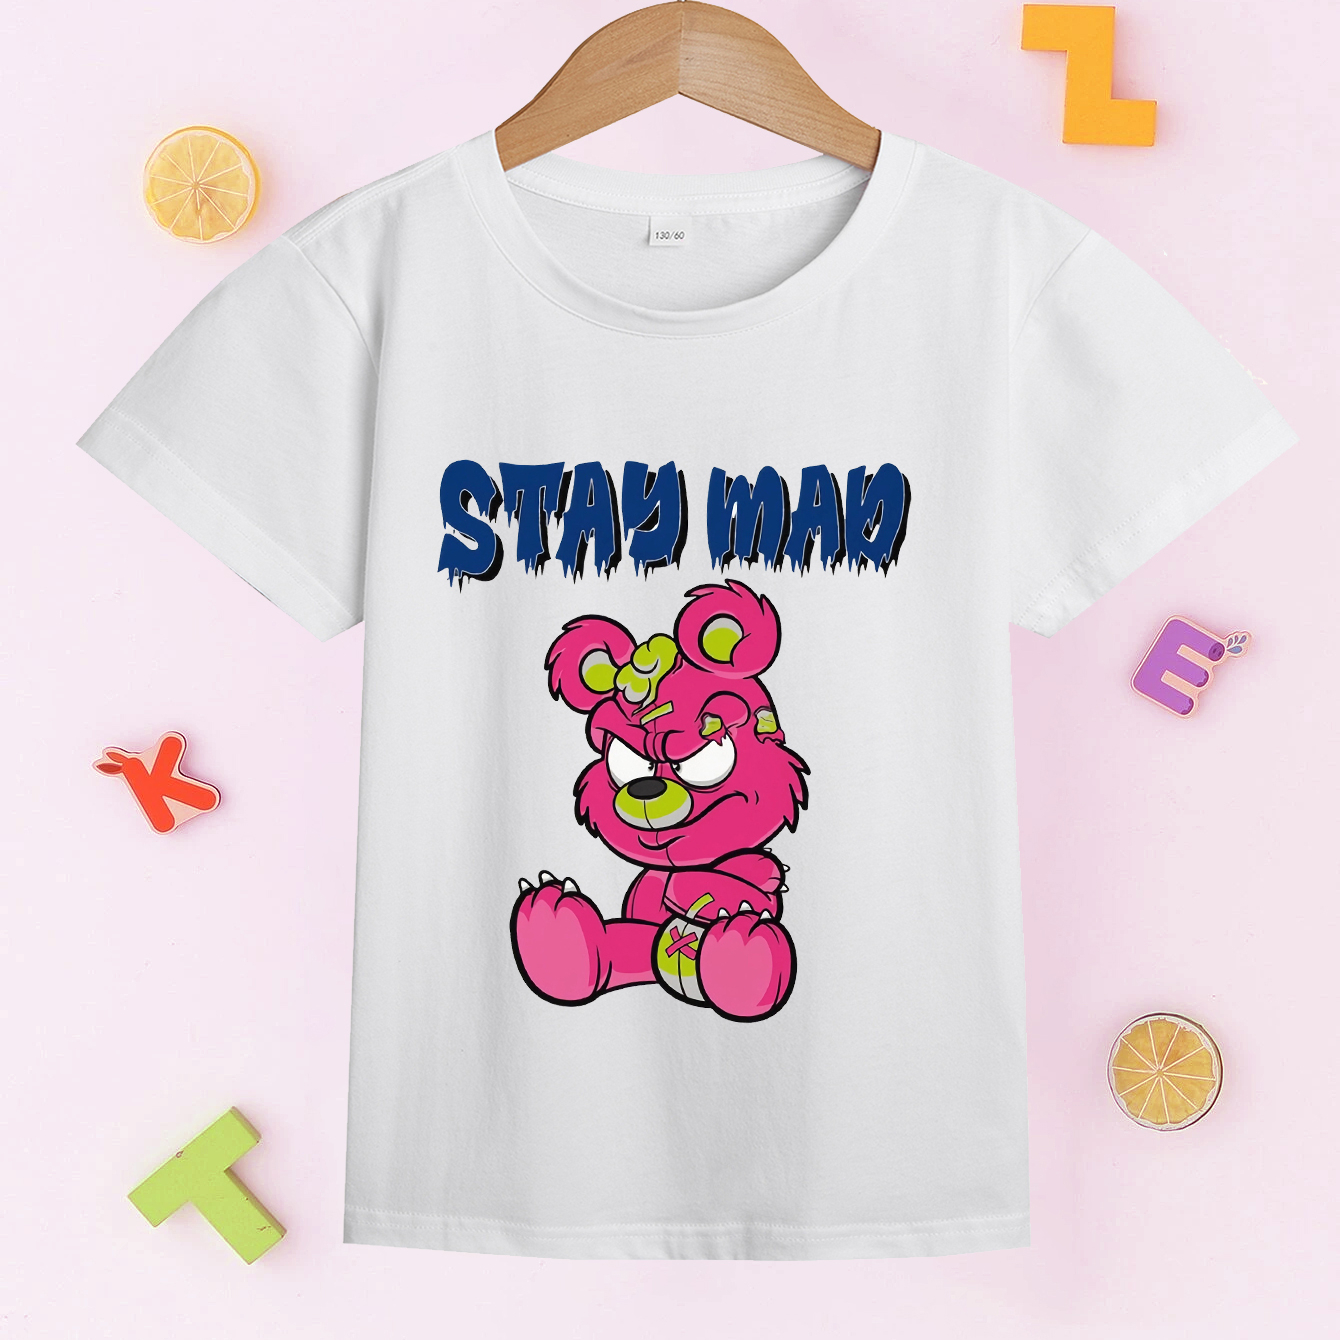 

Stylish Stay Mad Bear Print Boys Creative T-shirt, Casual Lightweight Comfy Short Sleeve Tee Tops, Kids Clothings For Summer